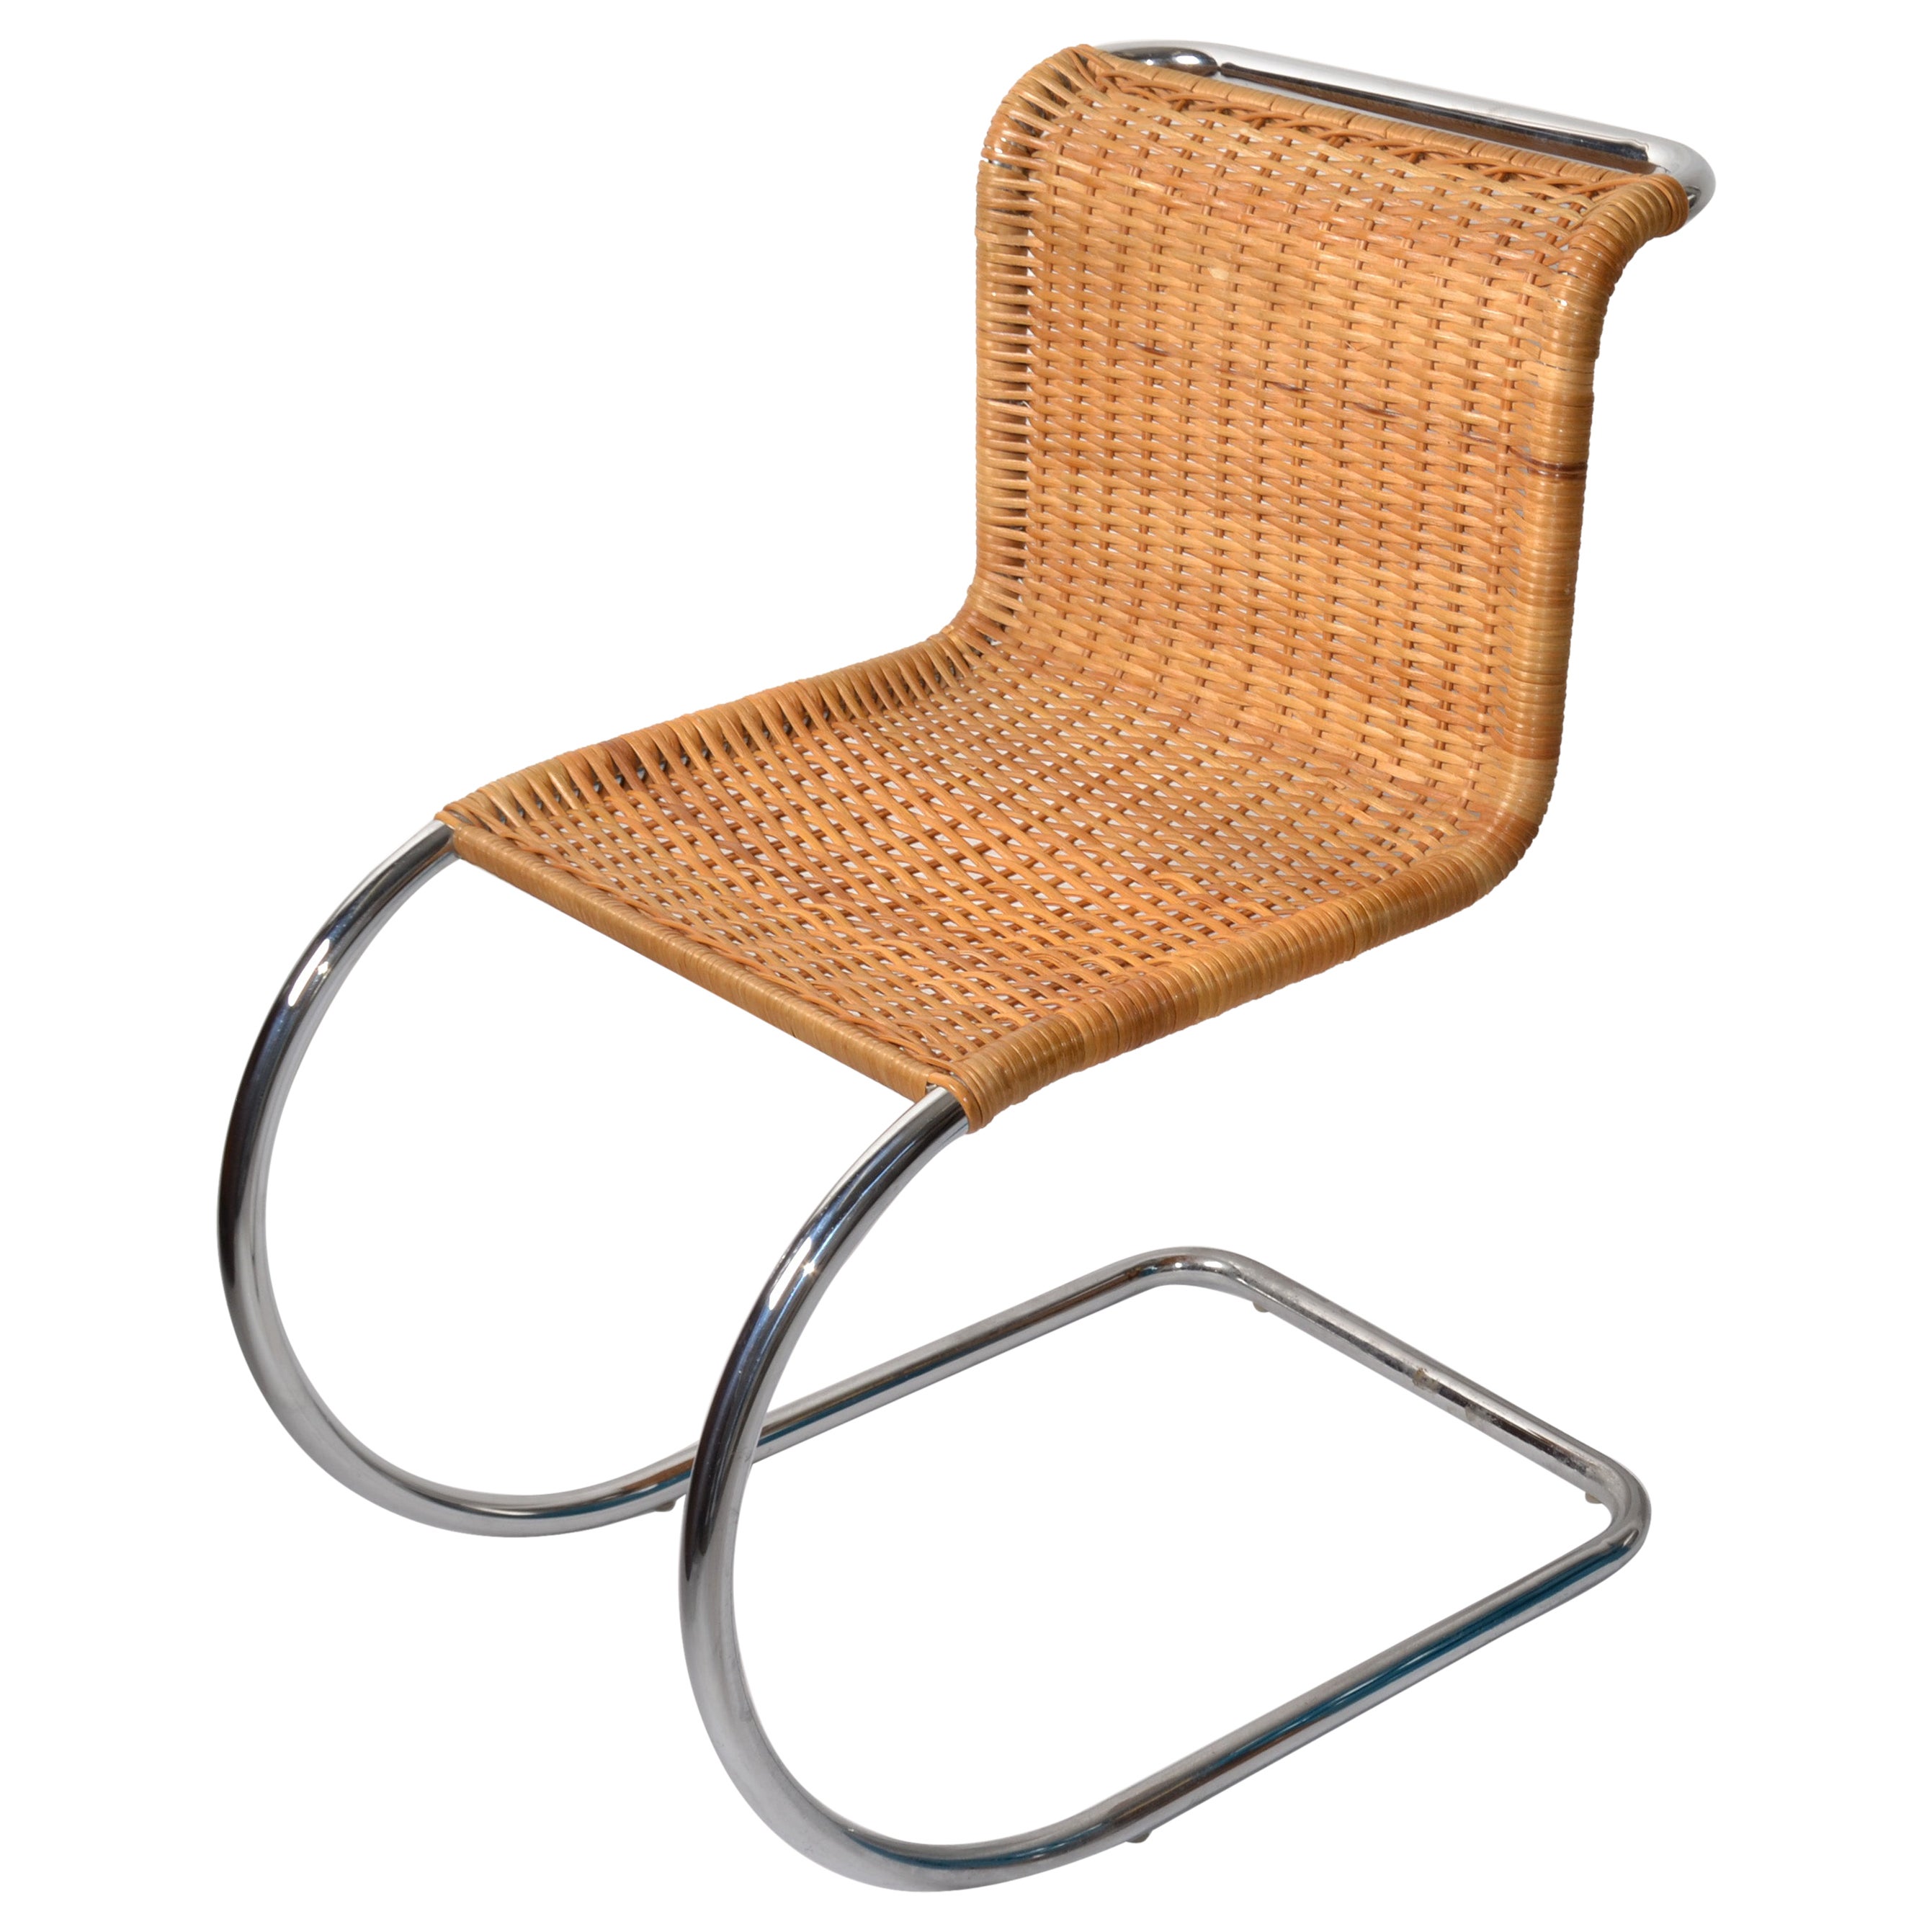 Tubular Ludwig Mies van der Rohe Attributed Mr Chair Armless Woven Cane Seat 70s For Sale